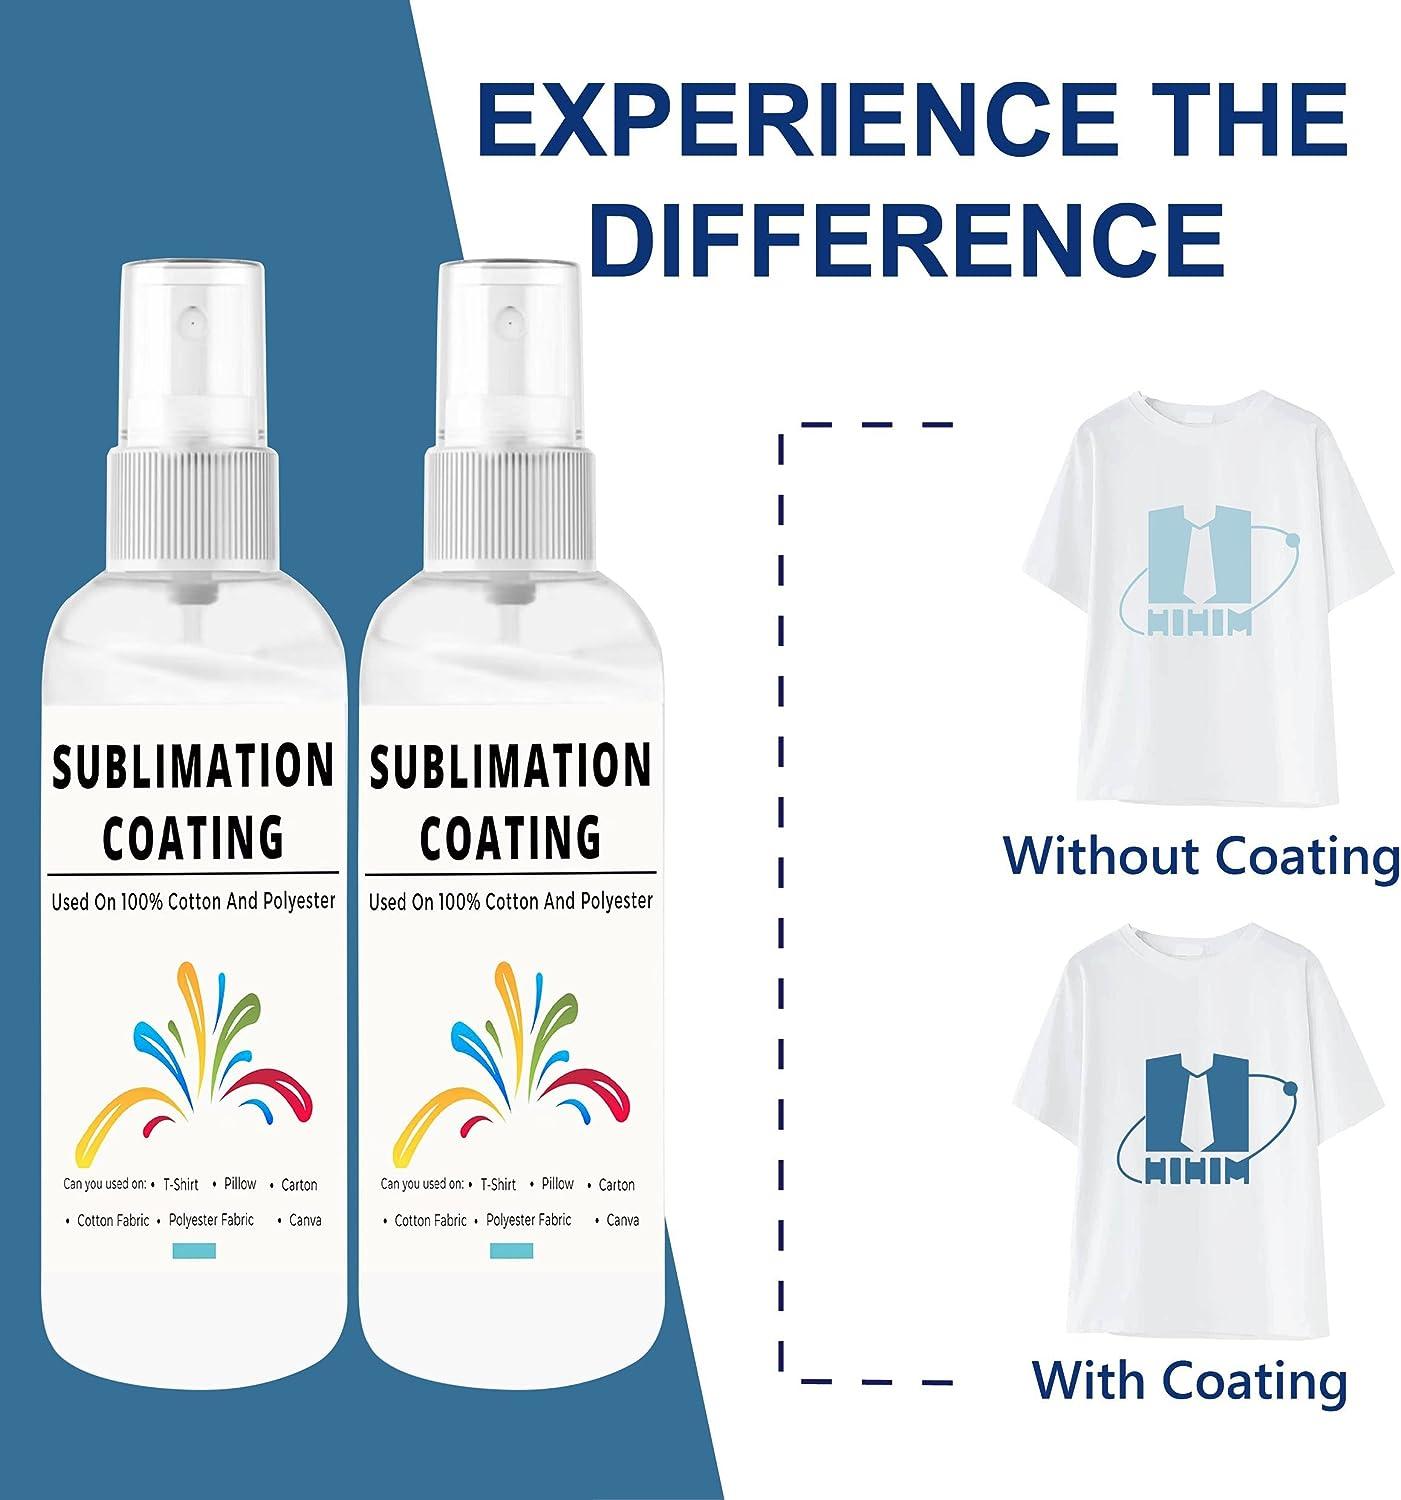 Sublimation Spray for Cotton, Sublimation Coating Spray, Quick Dry & Super  Adhesion, High Gloss Sublimation Coating Supplies for All Fabric Polyester